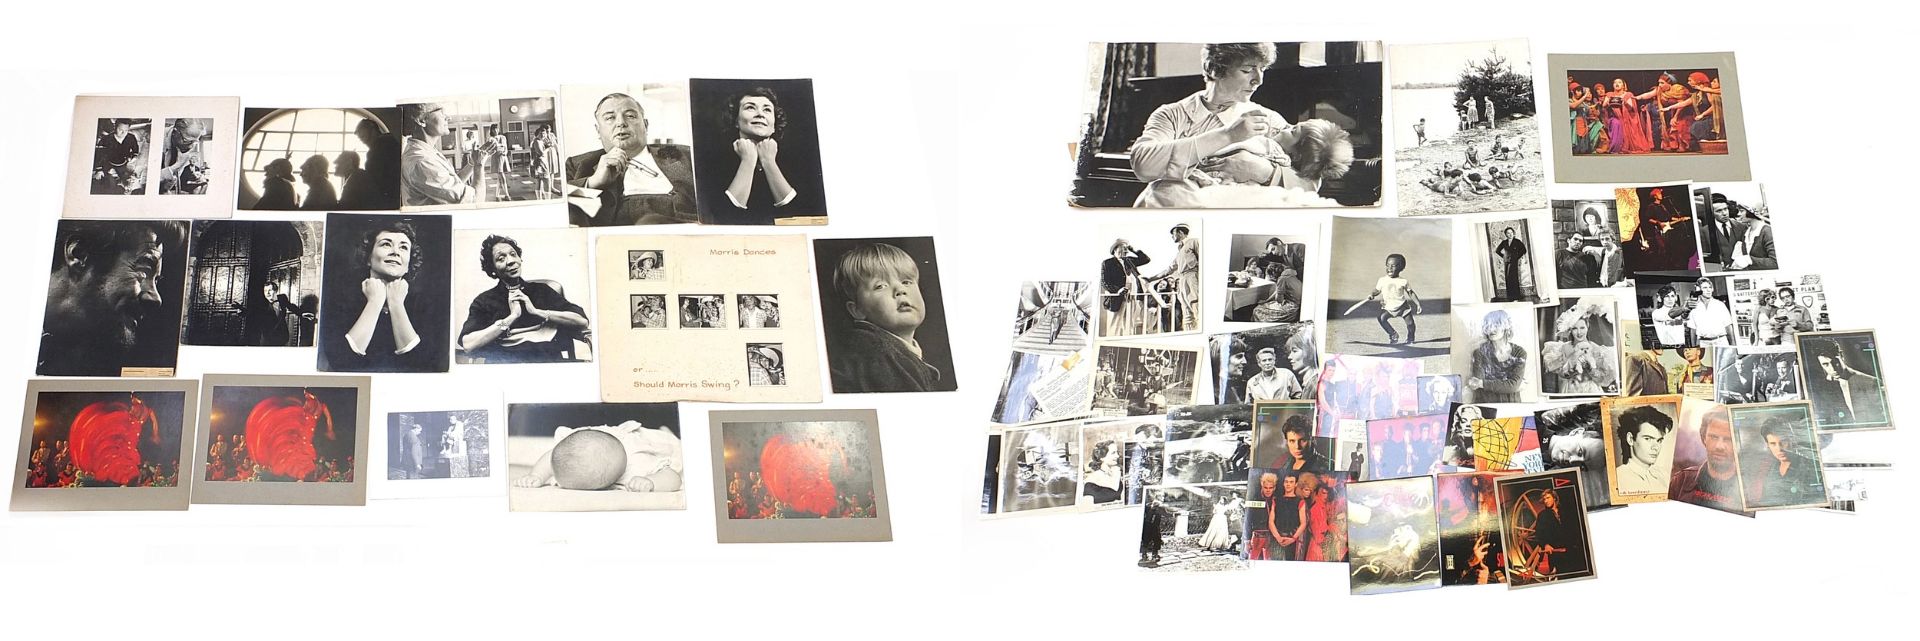 Collection of vintage photographs, some theatrical including Morris Newcombe black and white film